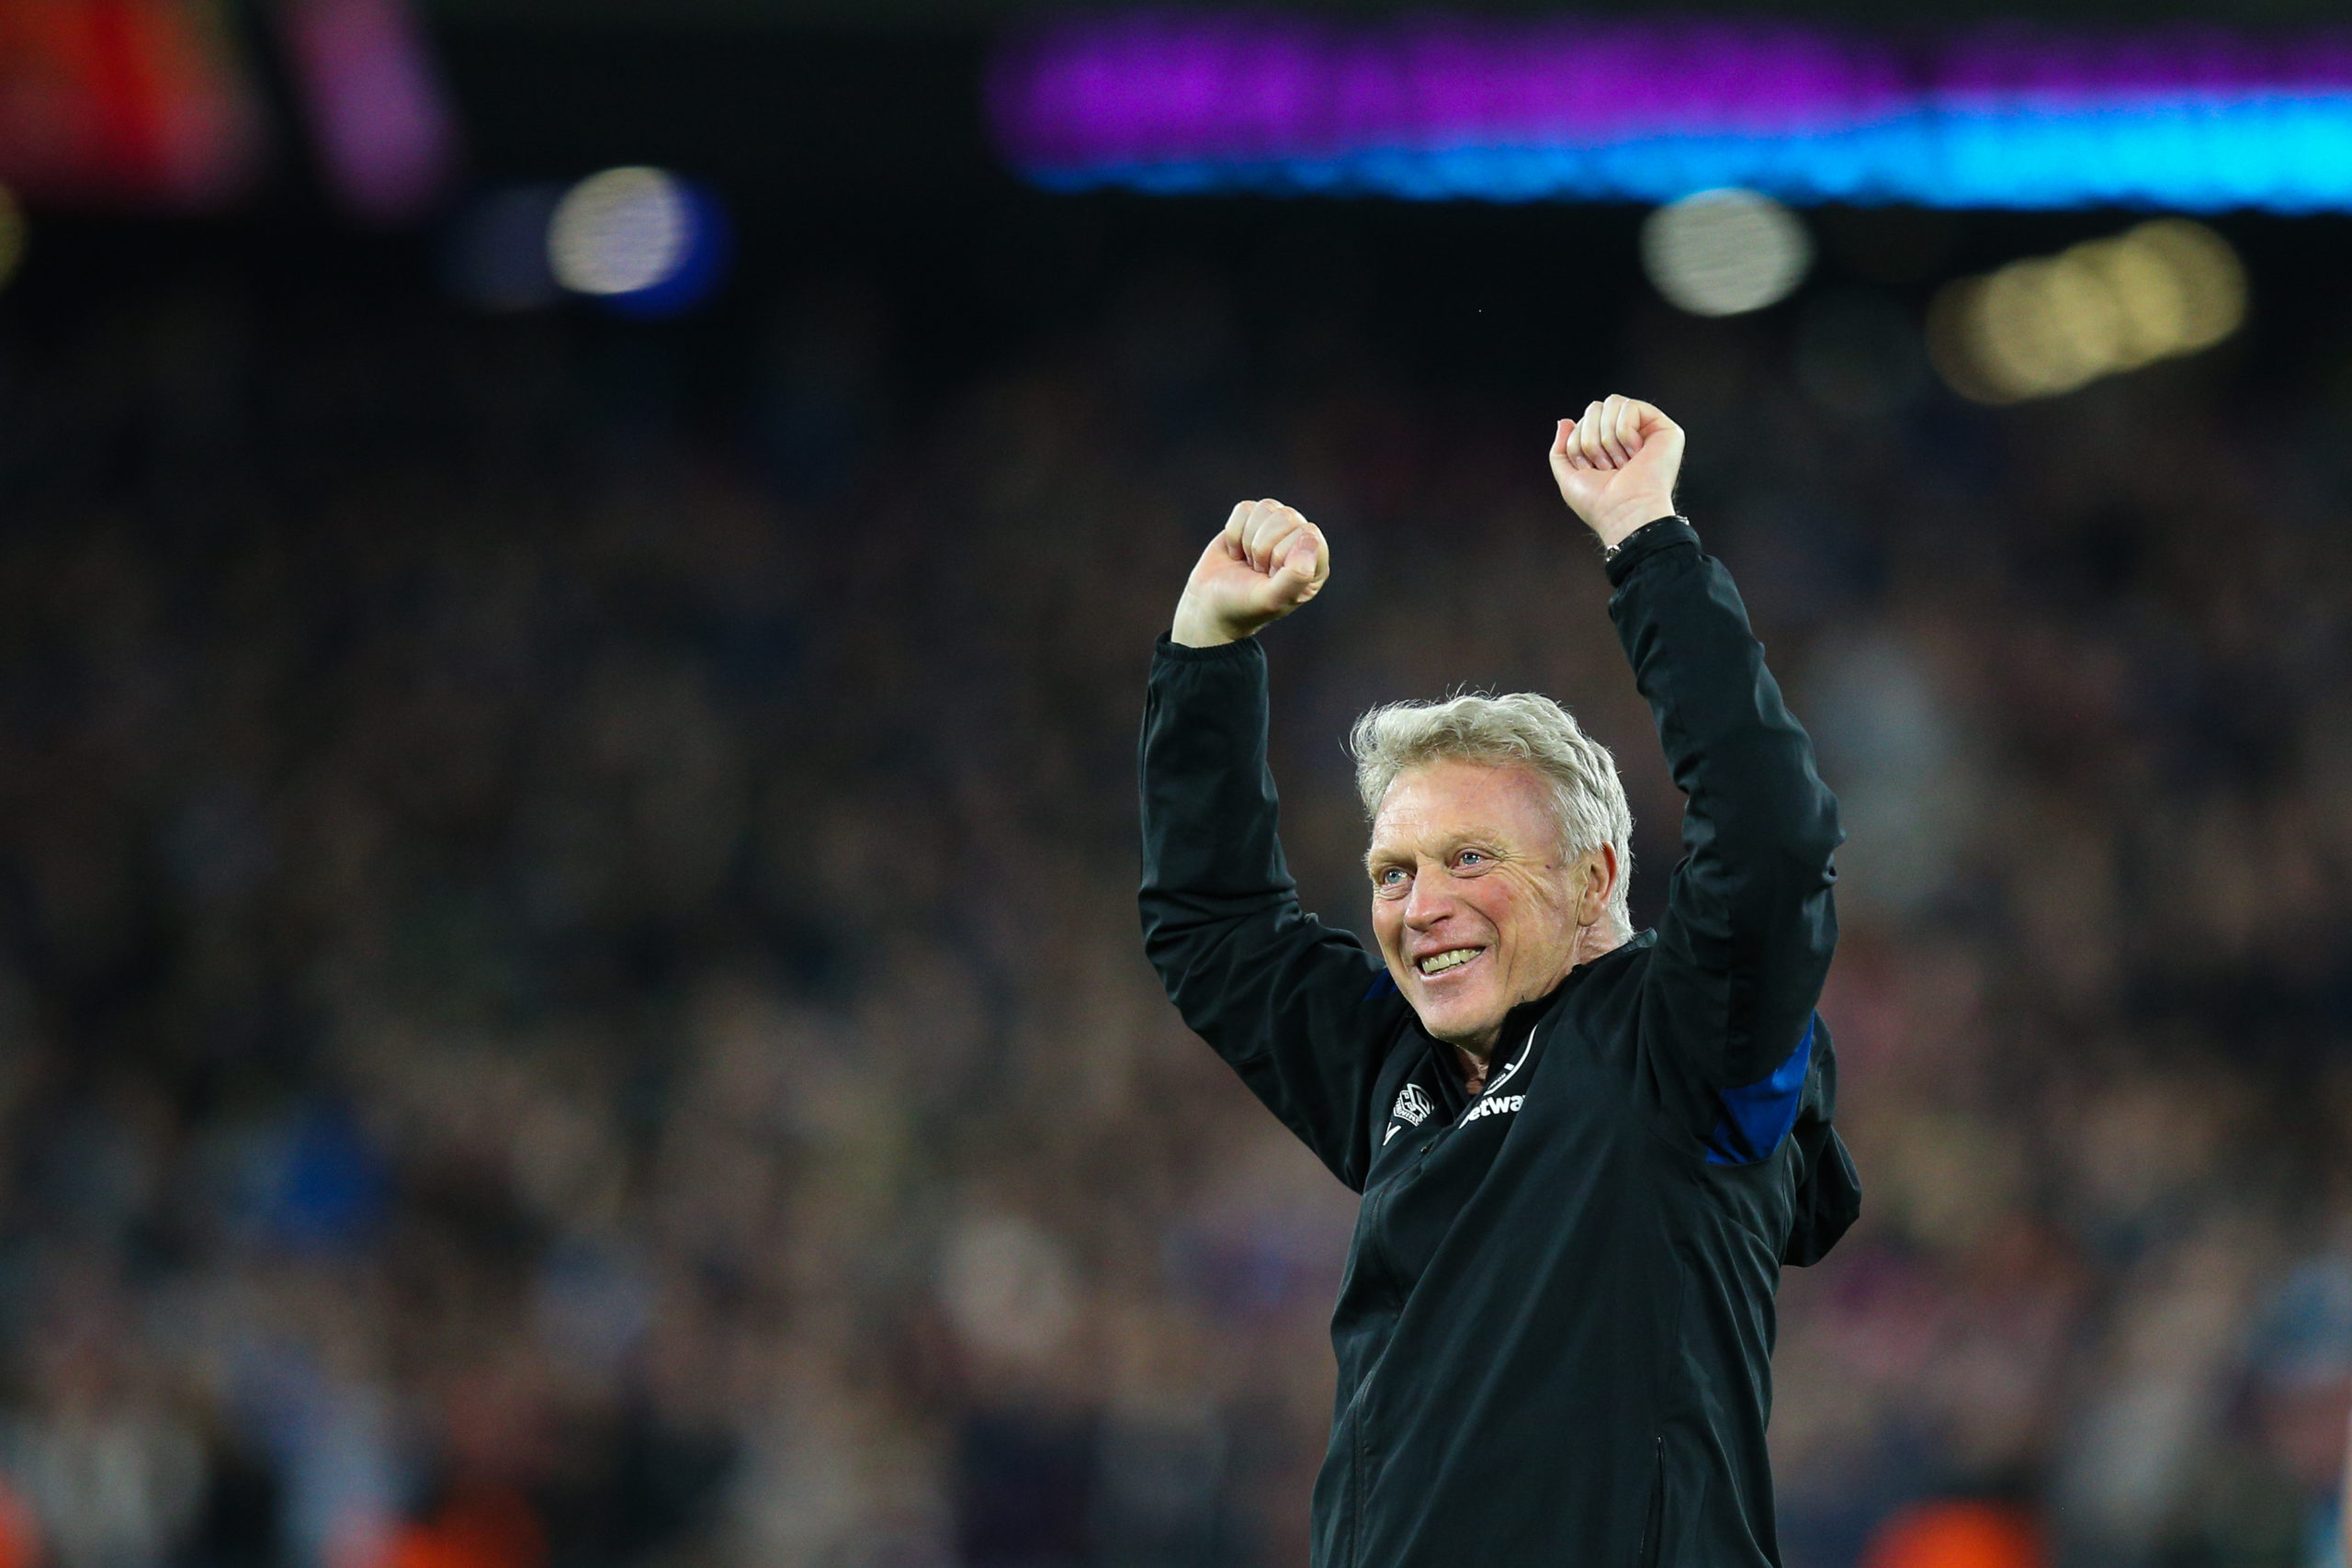 Make us believe again David Moyes now is time to unleash a new attack-minded West Ham even if it is not in your image